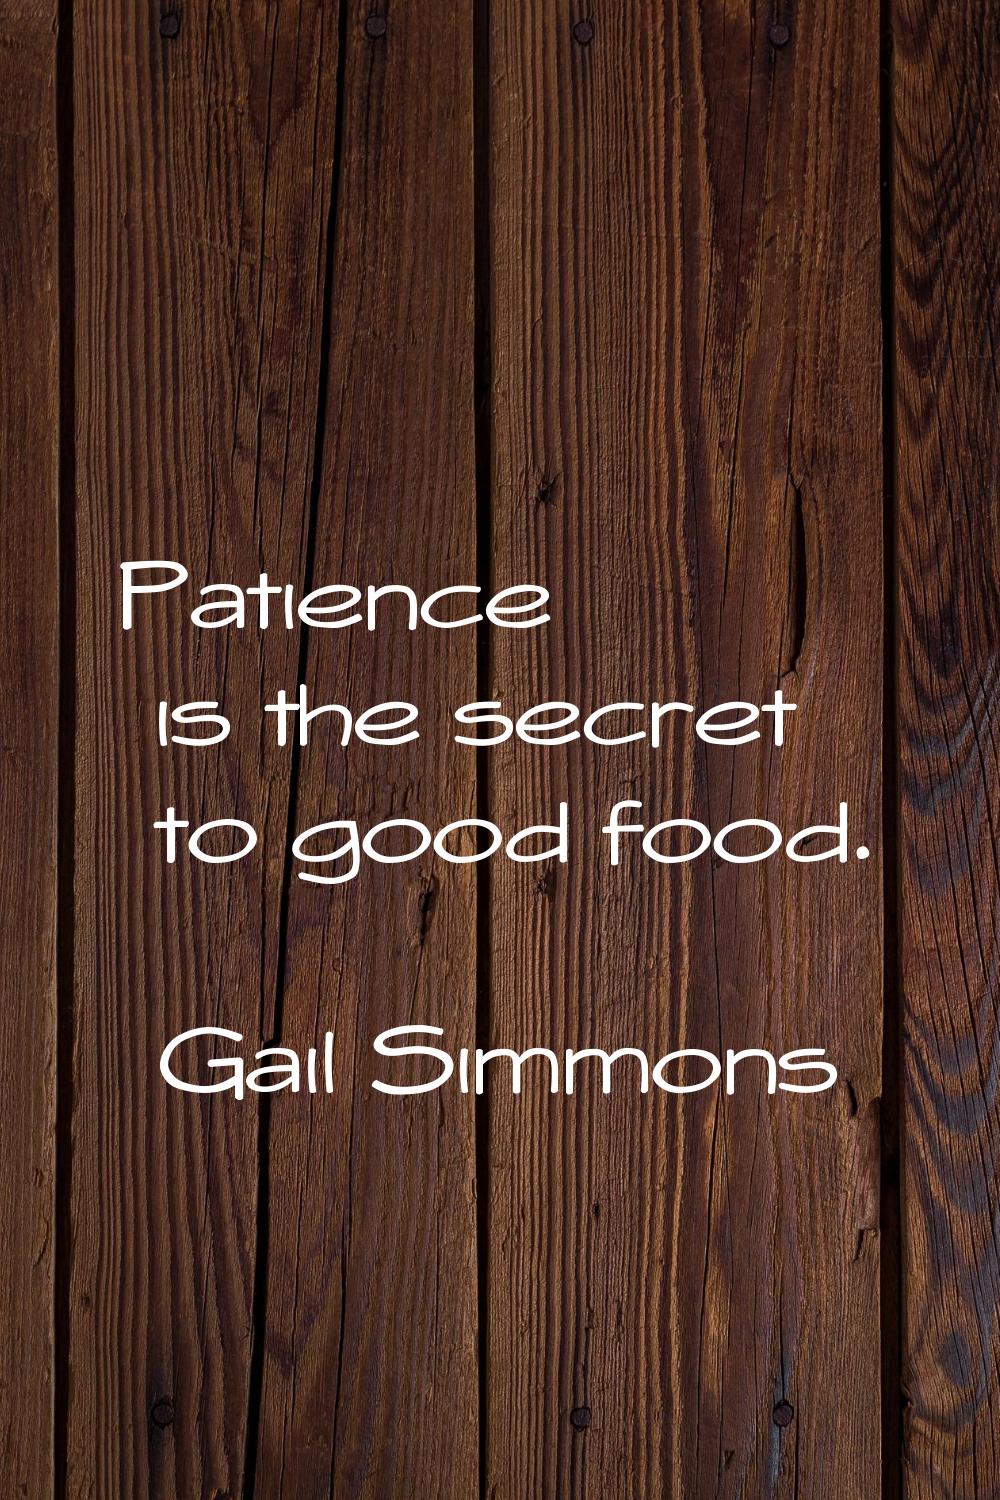 Patience is the secret to good food.